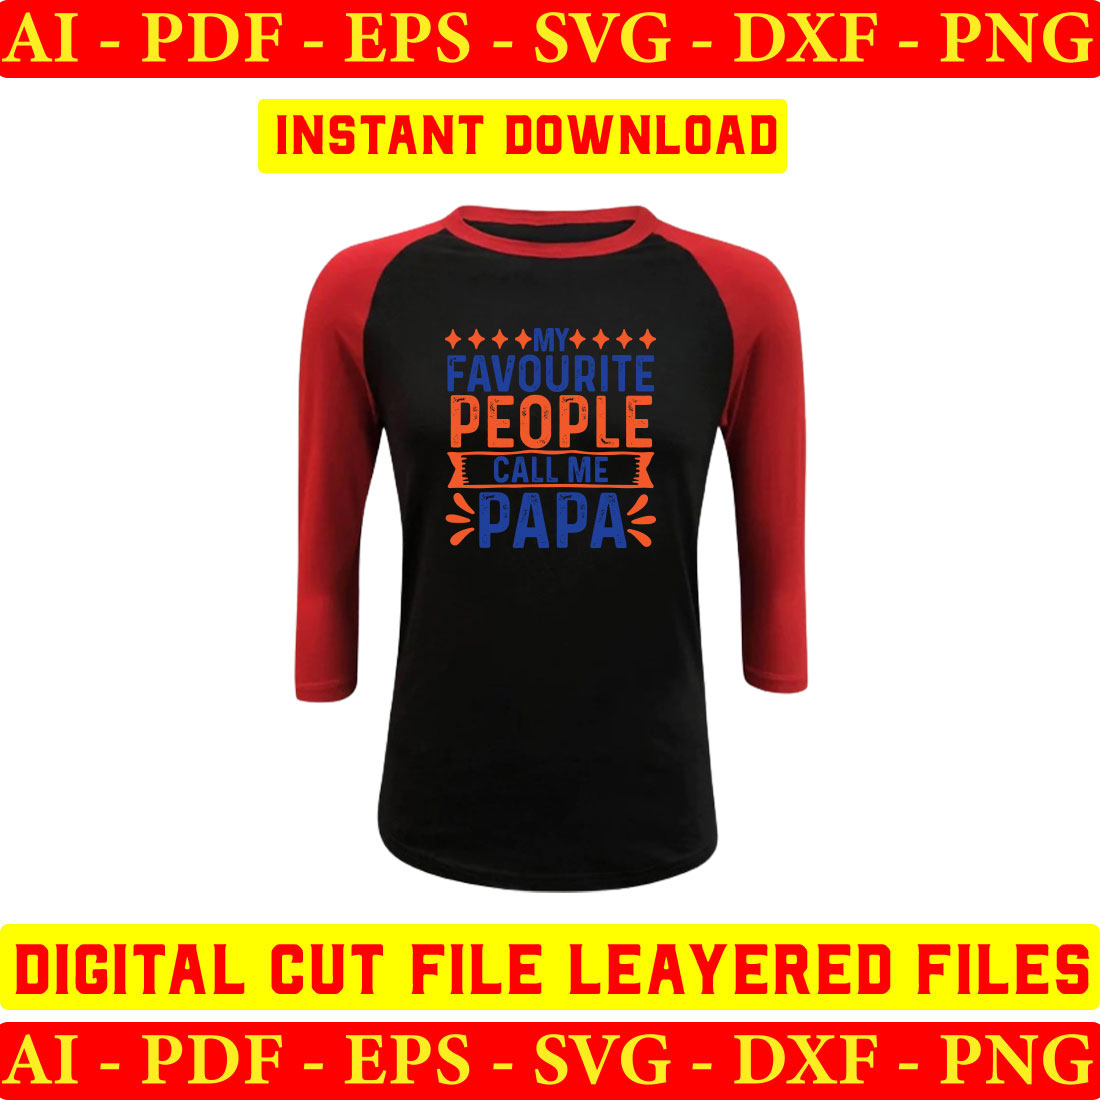 Black and red baseball shirt with the words favorite people can be papa.